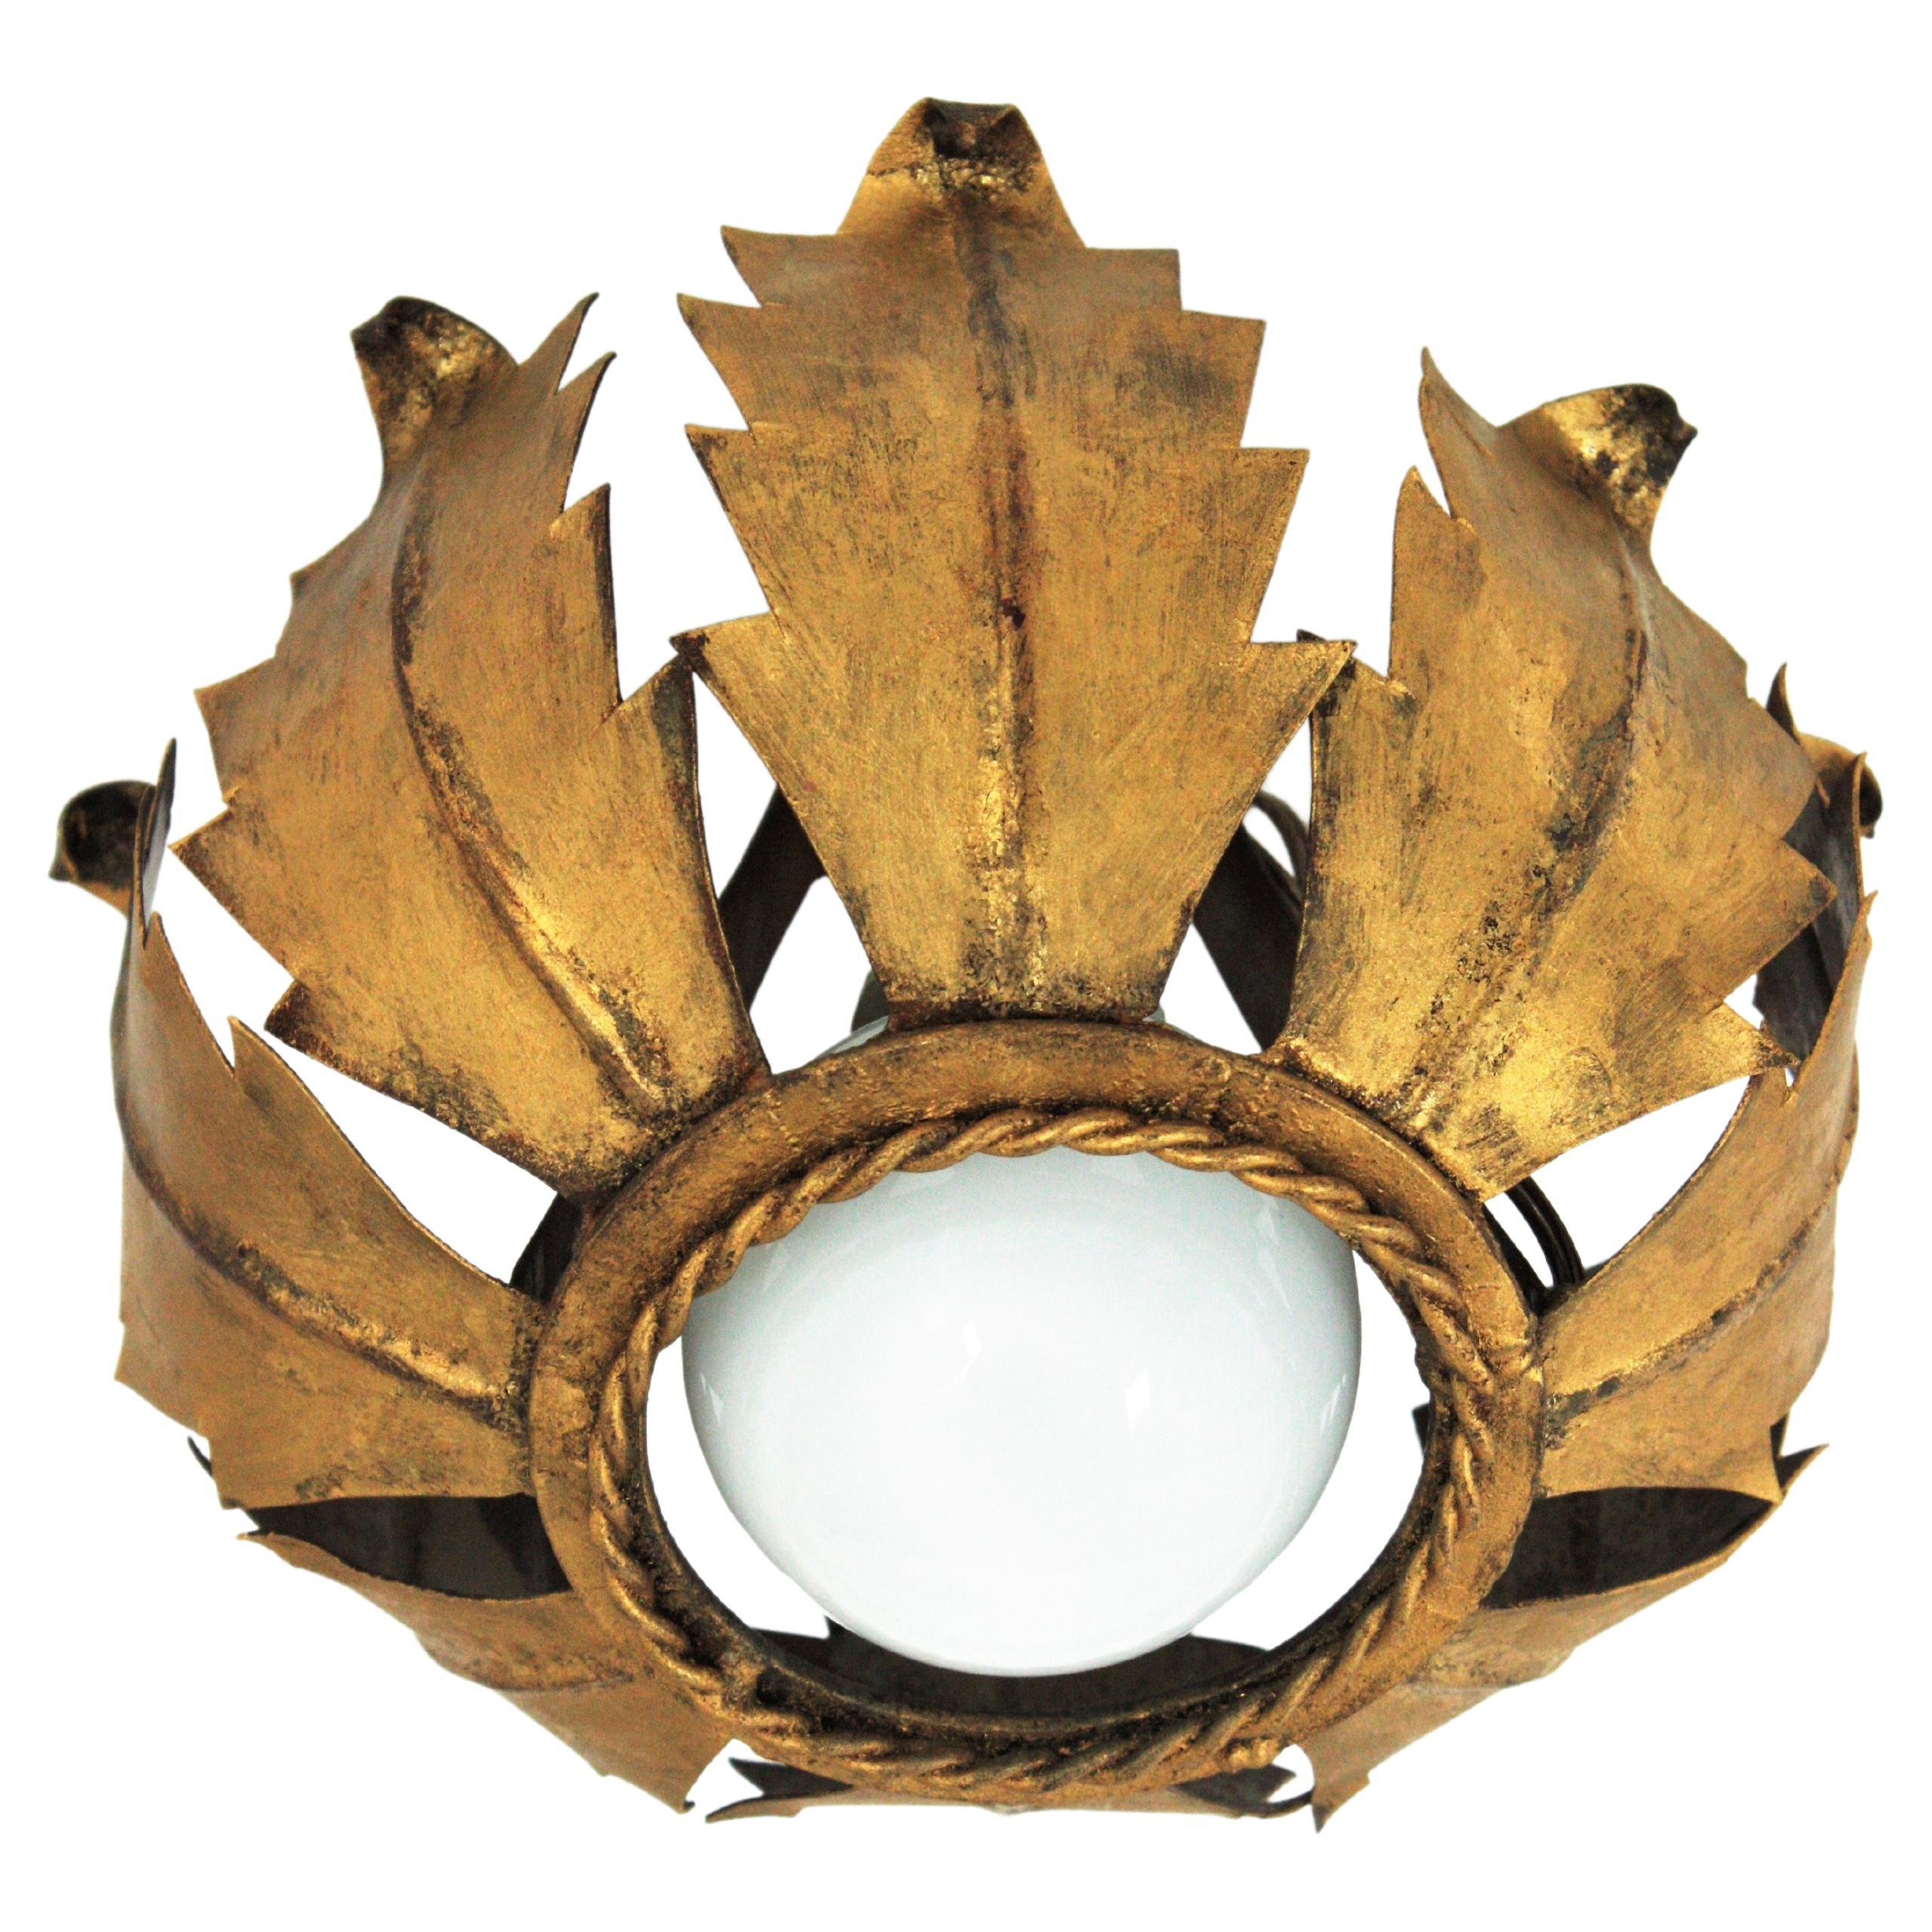 Flower sunburst flush mount or pendant in bronze gilt patinated metal. Spain, 1960s.
This ceiling light features a flower bud with leaves surrounding a central exposed bulb. Patinated in gilt color.
This sunburst light fixture can be placed flush